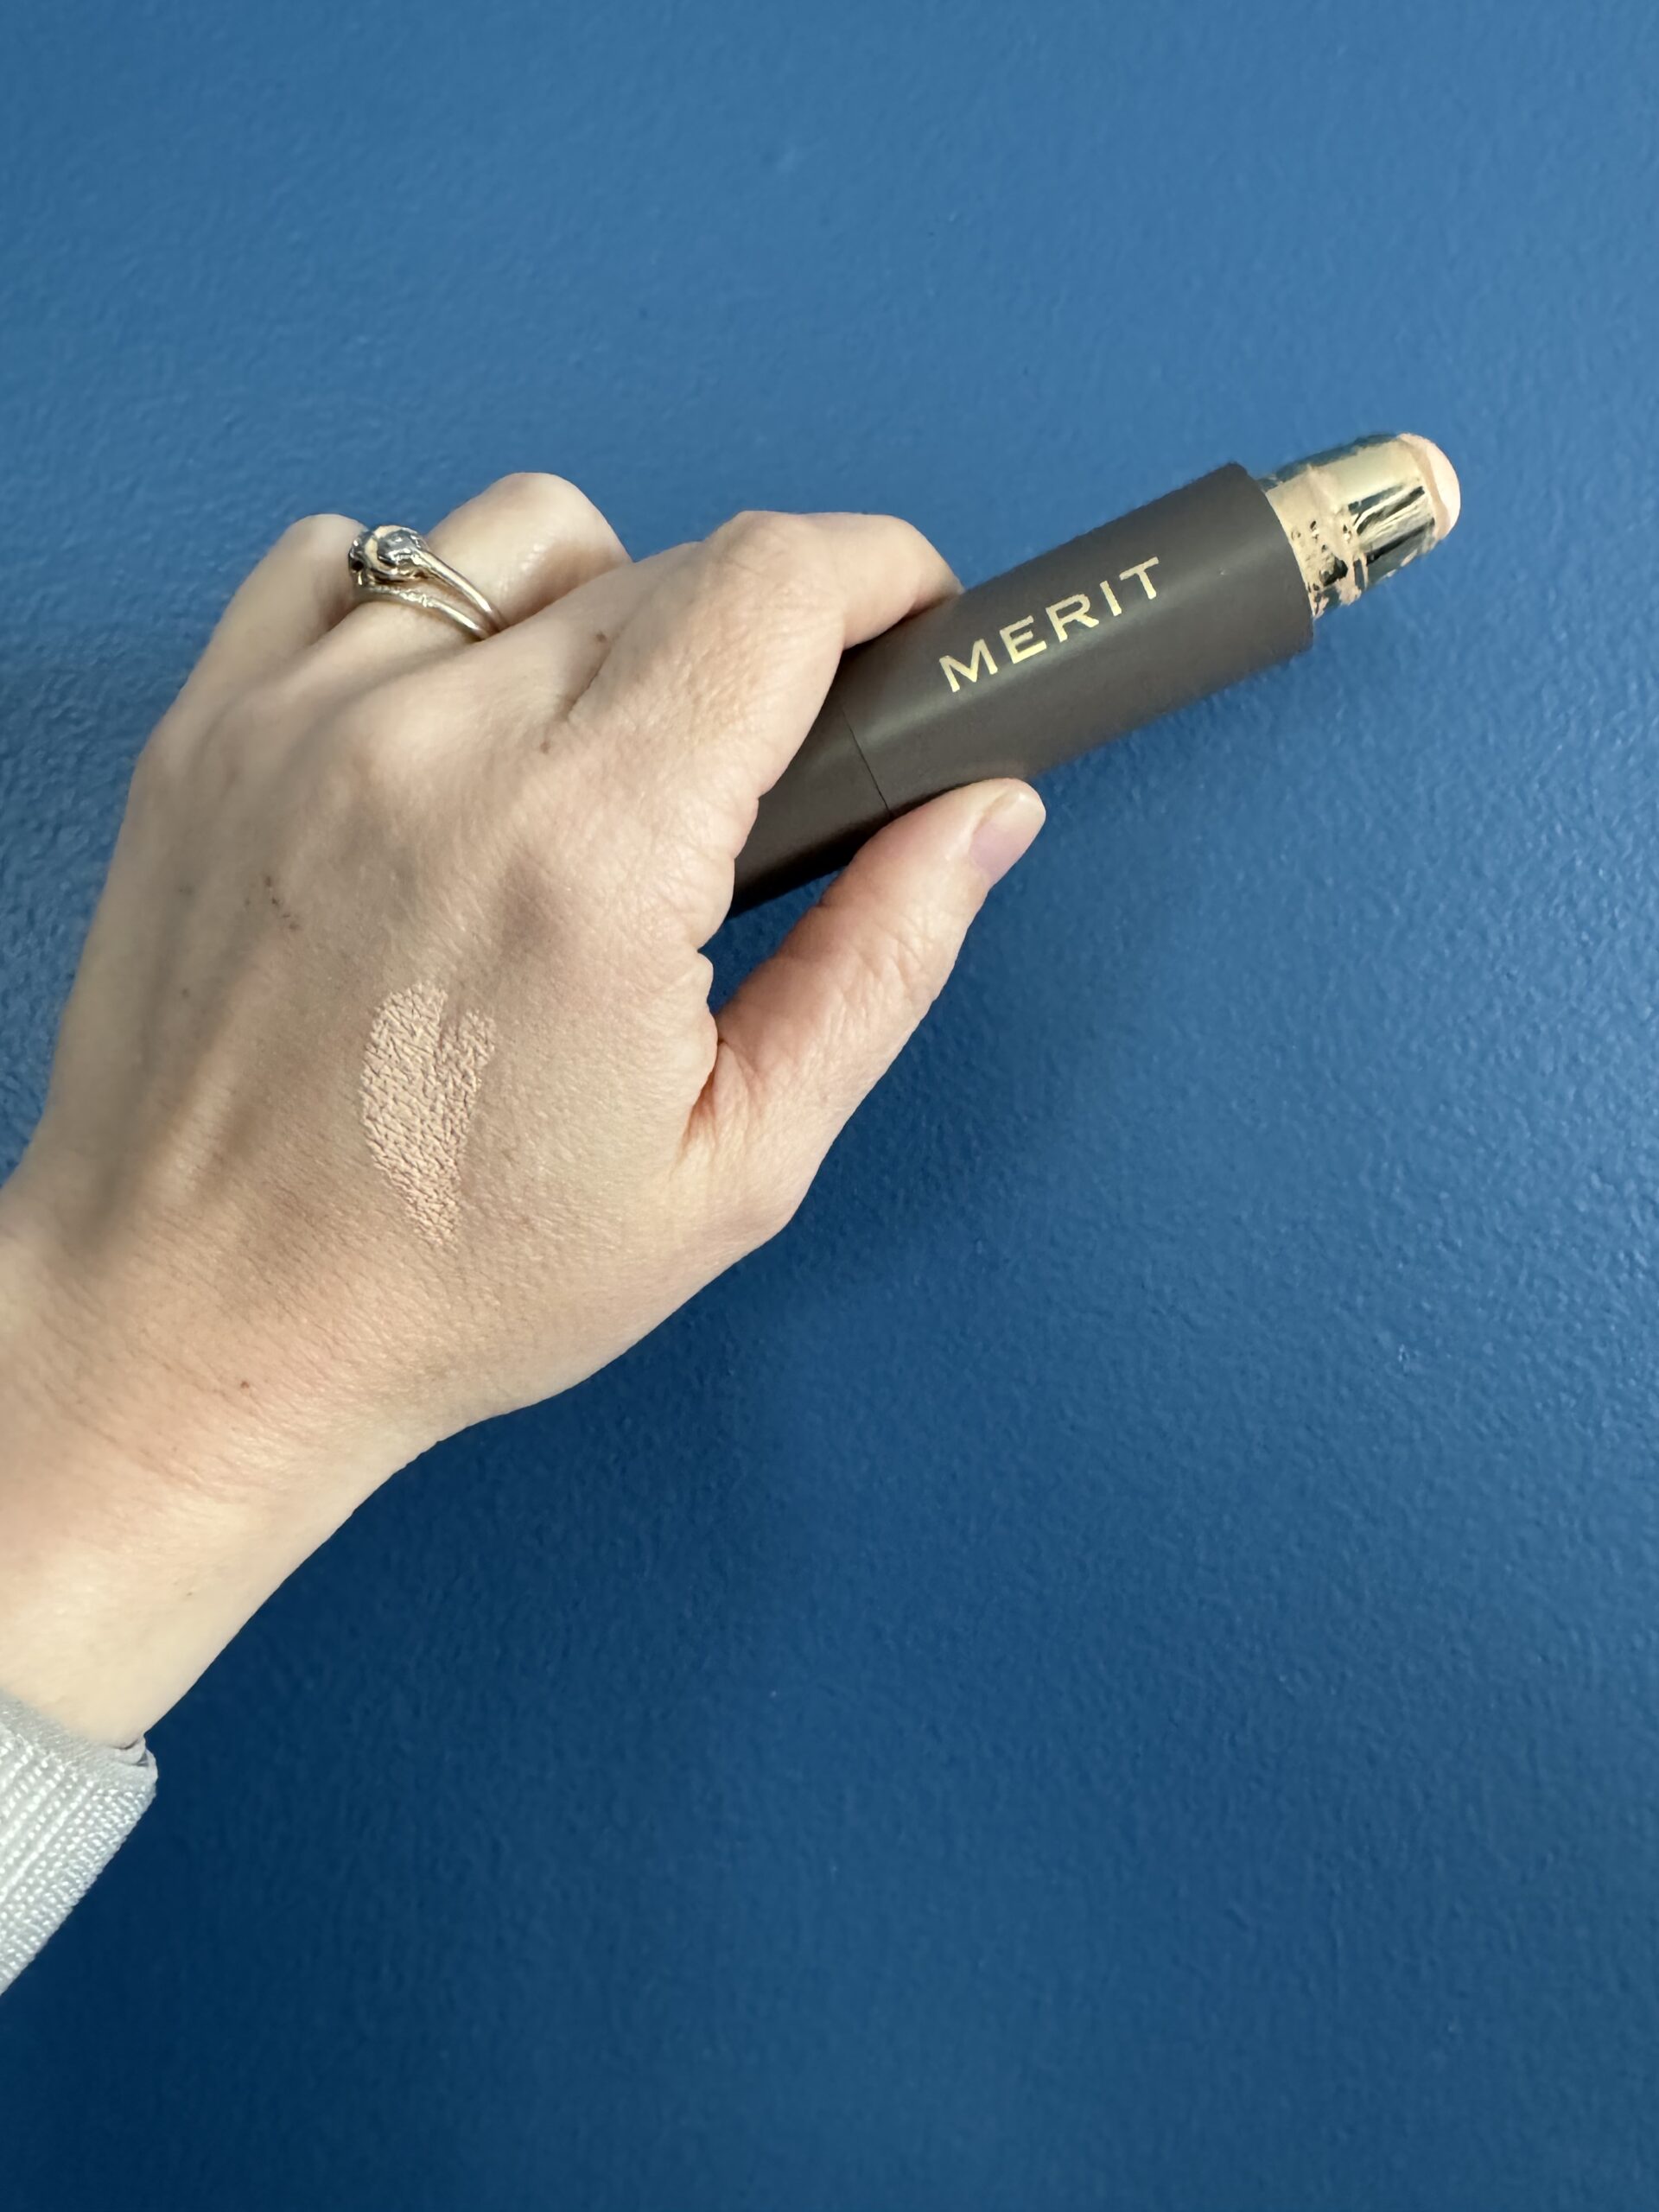 A hand against a blue background displaying swatched foundation makeup on the thumb and holding a tube of merit brand beauty product.